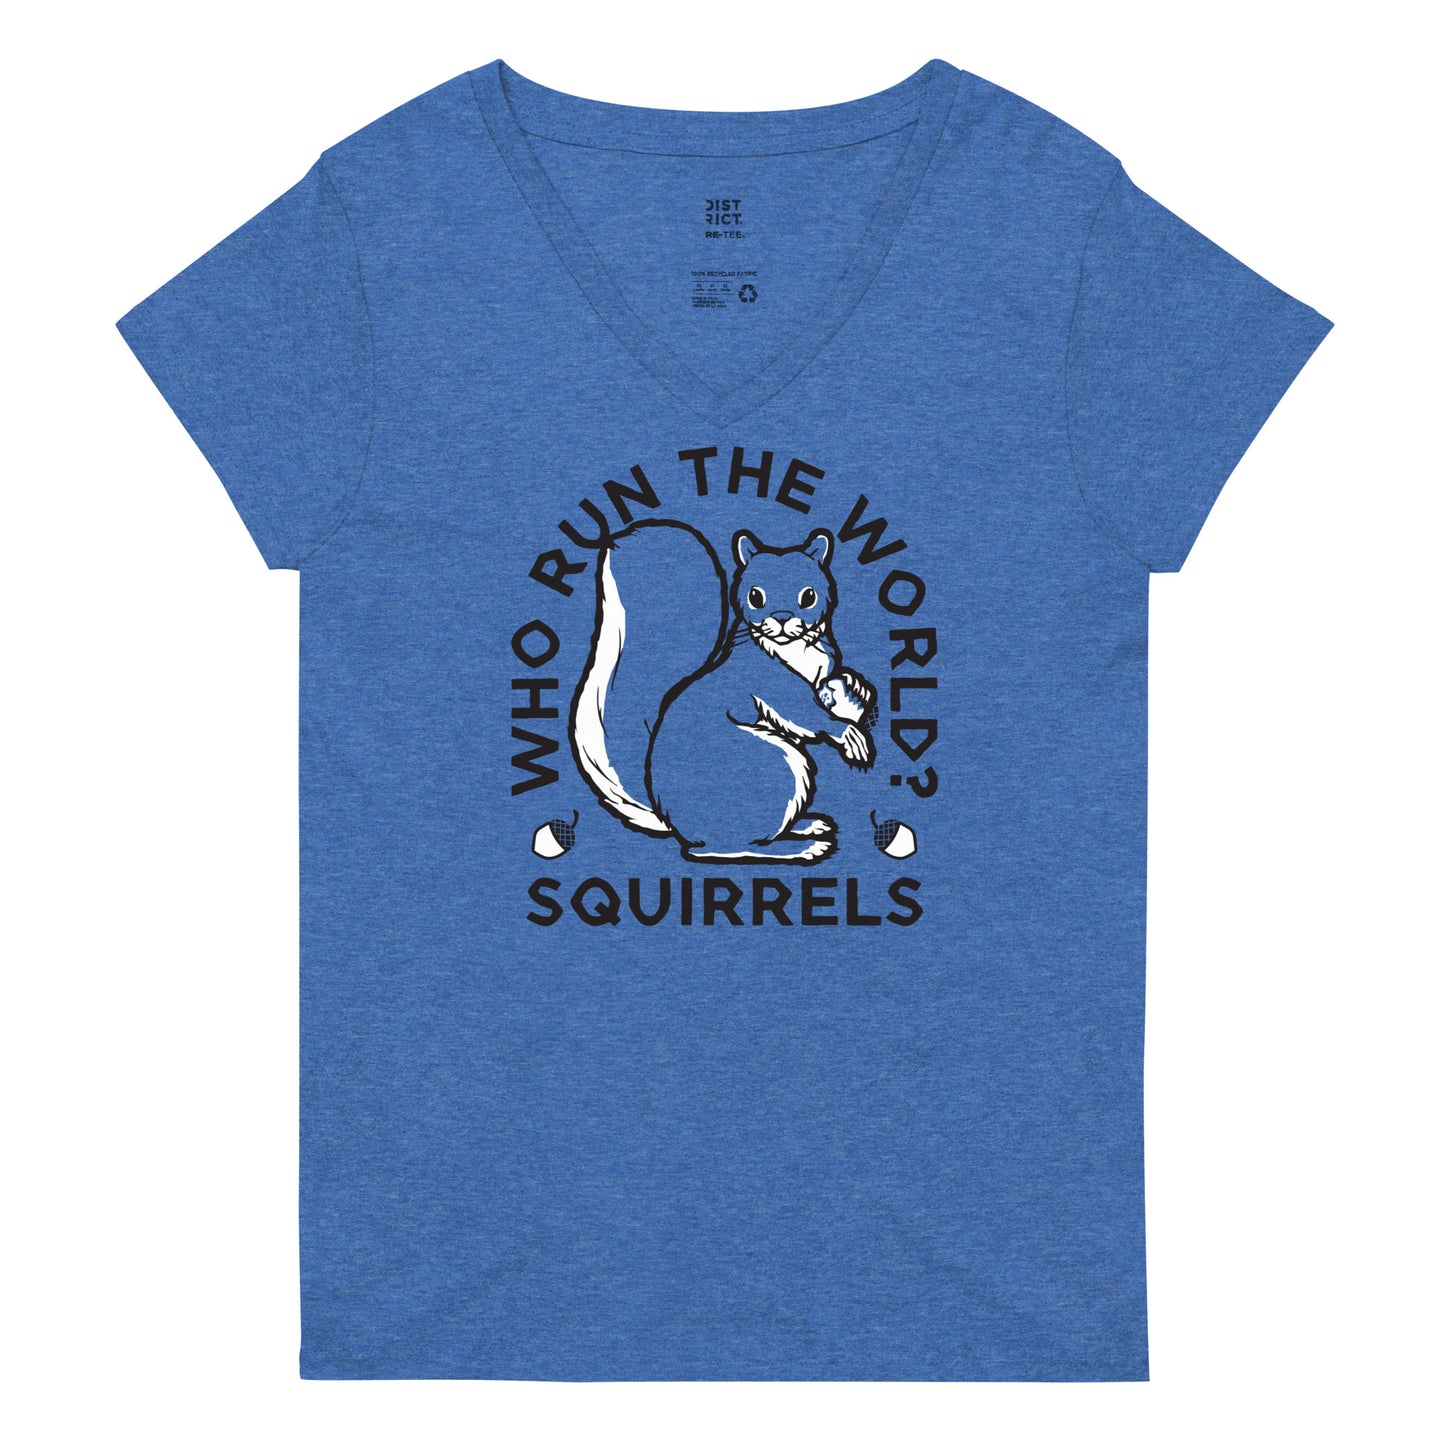 Who Run The World? Squirrels Women's V-Neck Tee